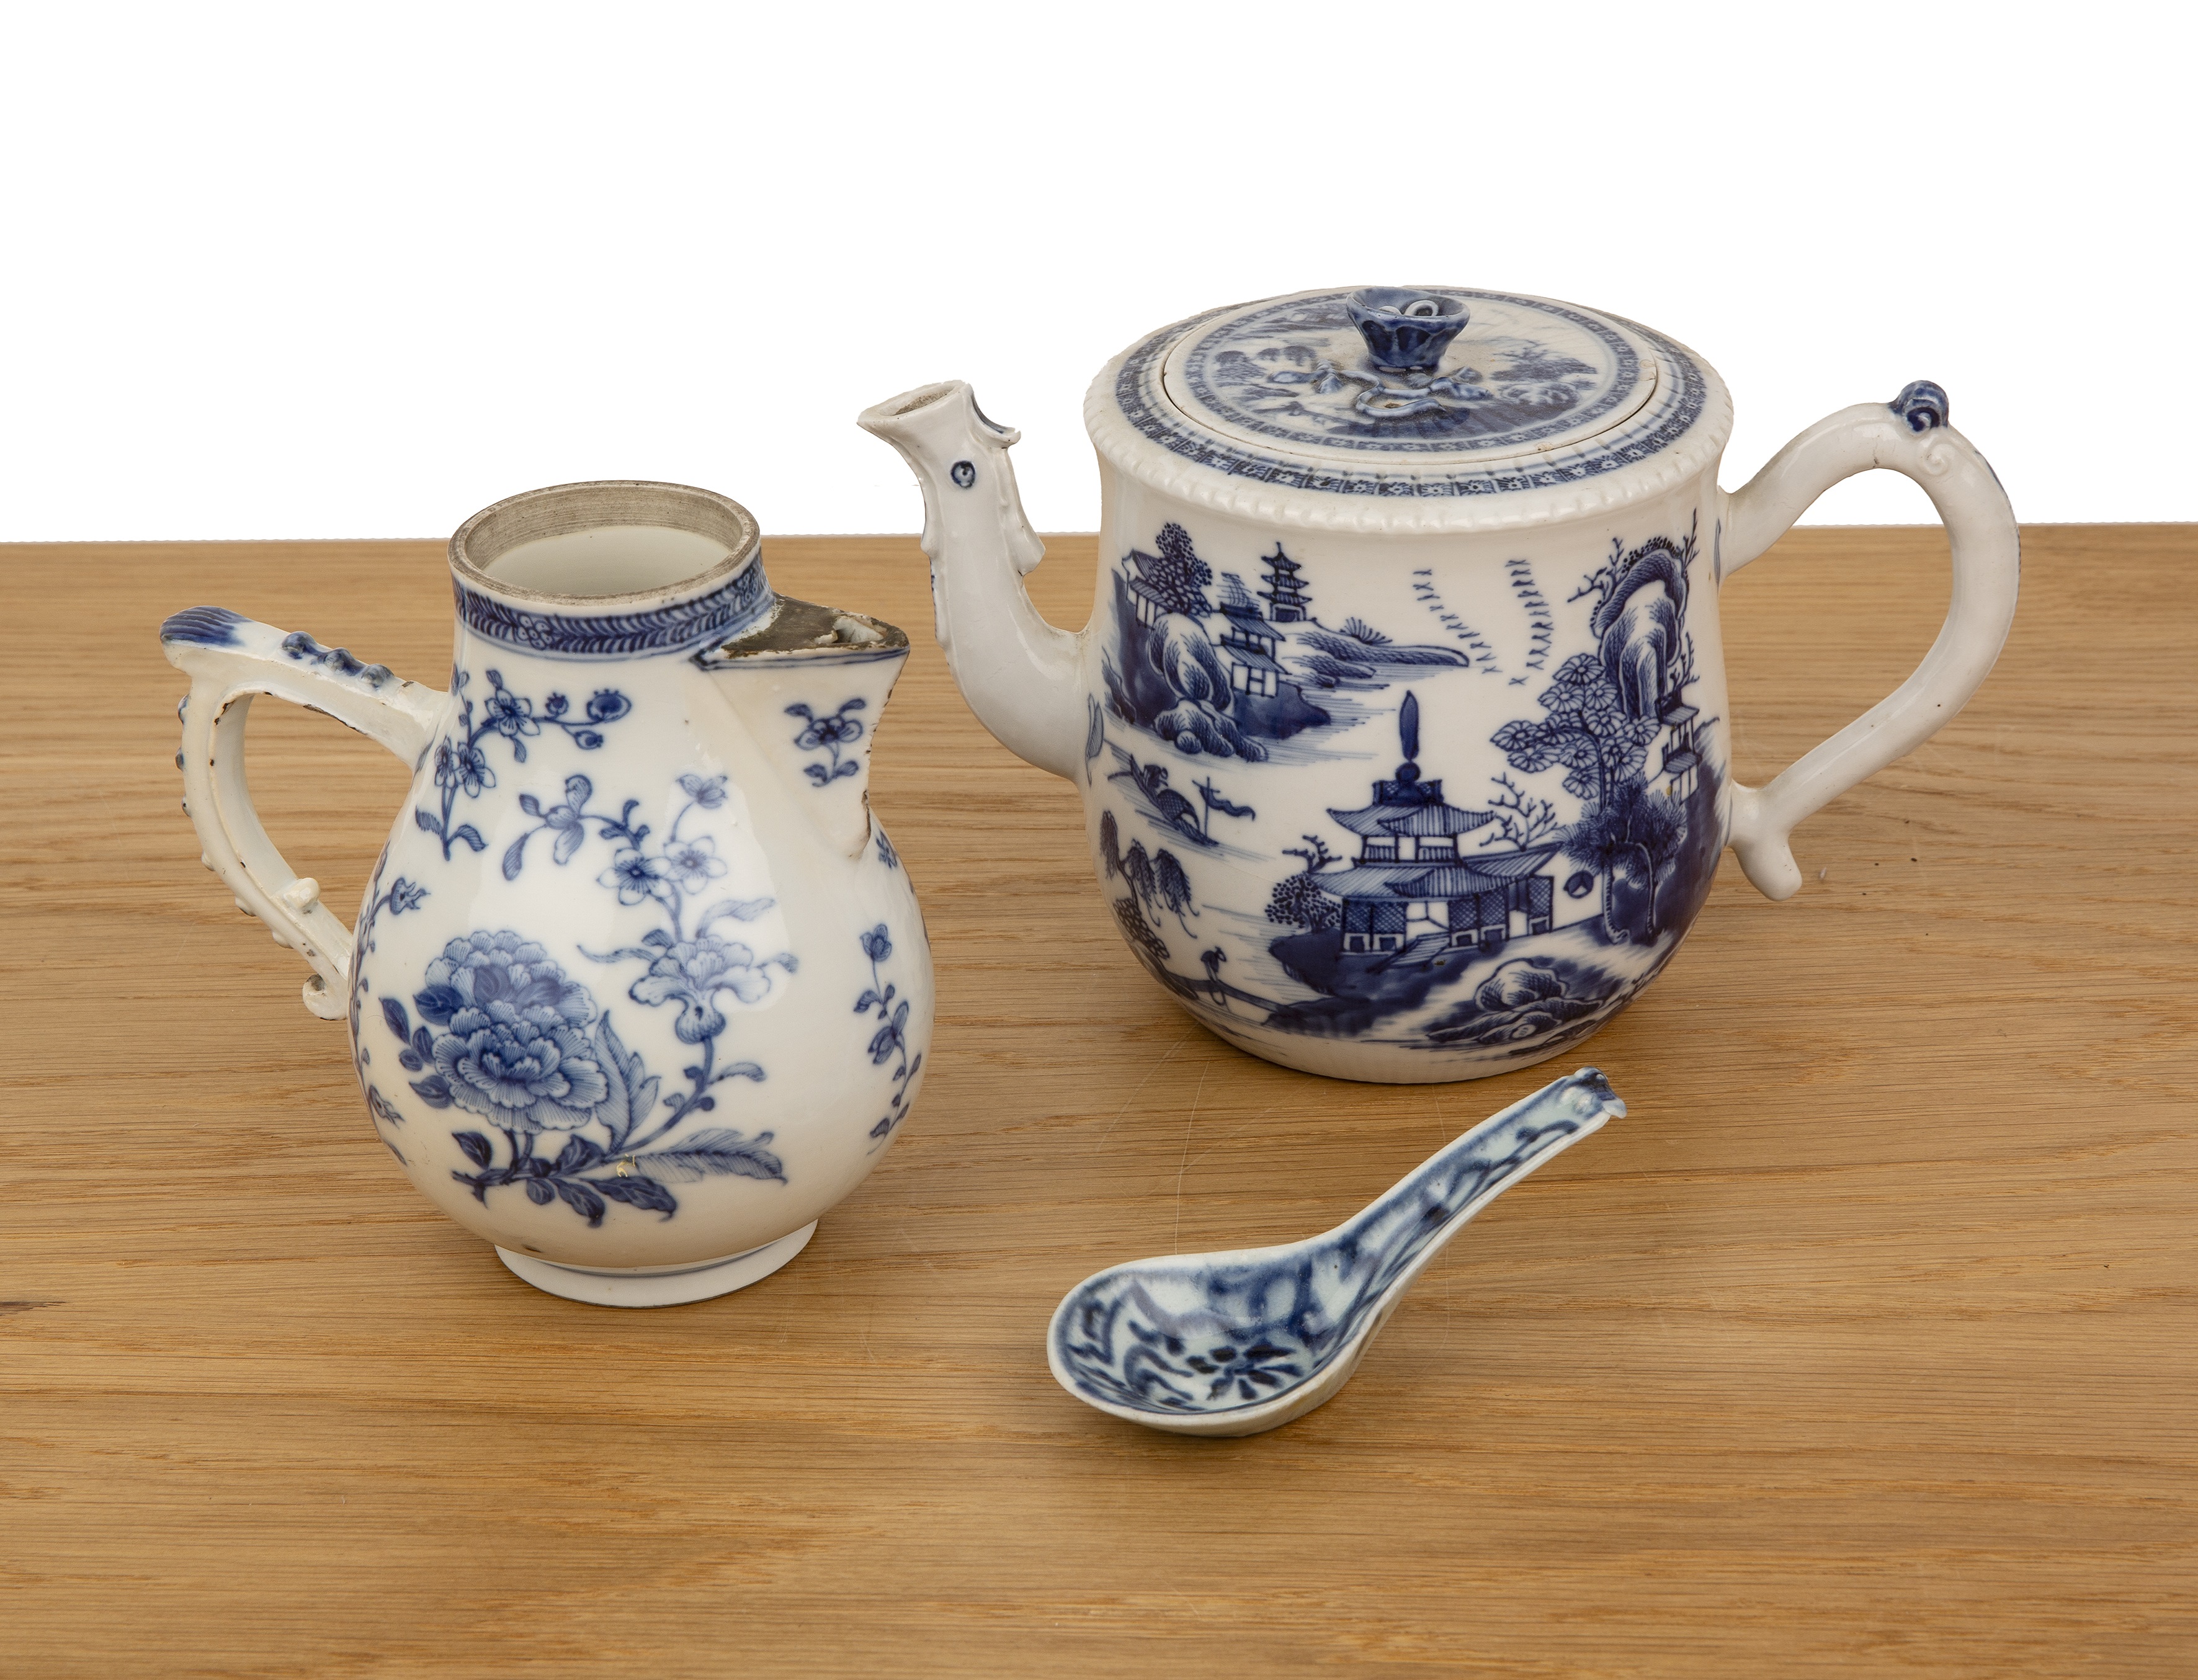 Three blue and white porcelain pieces Chinese, 18th/19th Century including an export teapot with a - Image 2 of 4